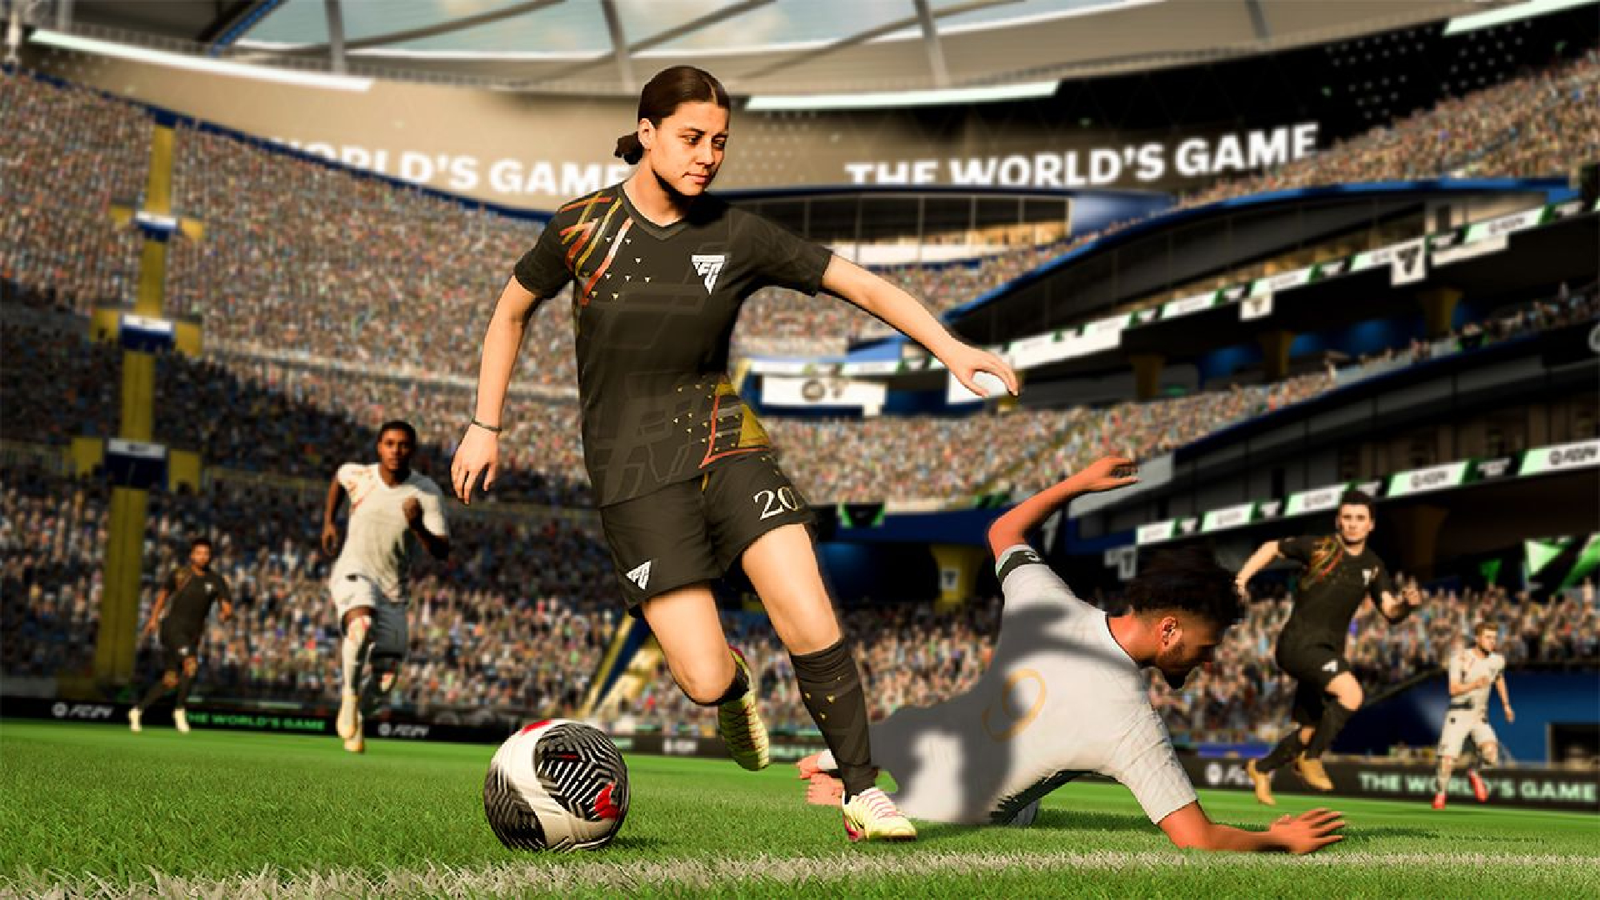 FC 24: Why there is no Brazil in EA Sports FC 24 #fc24 